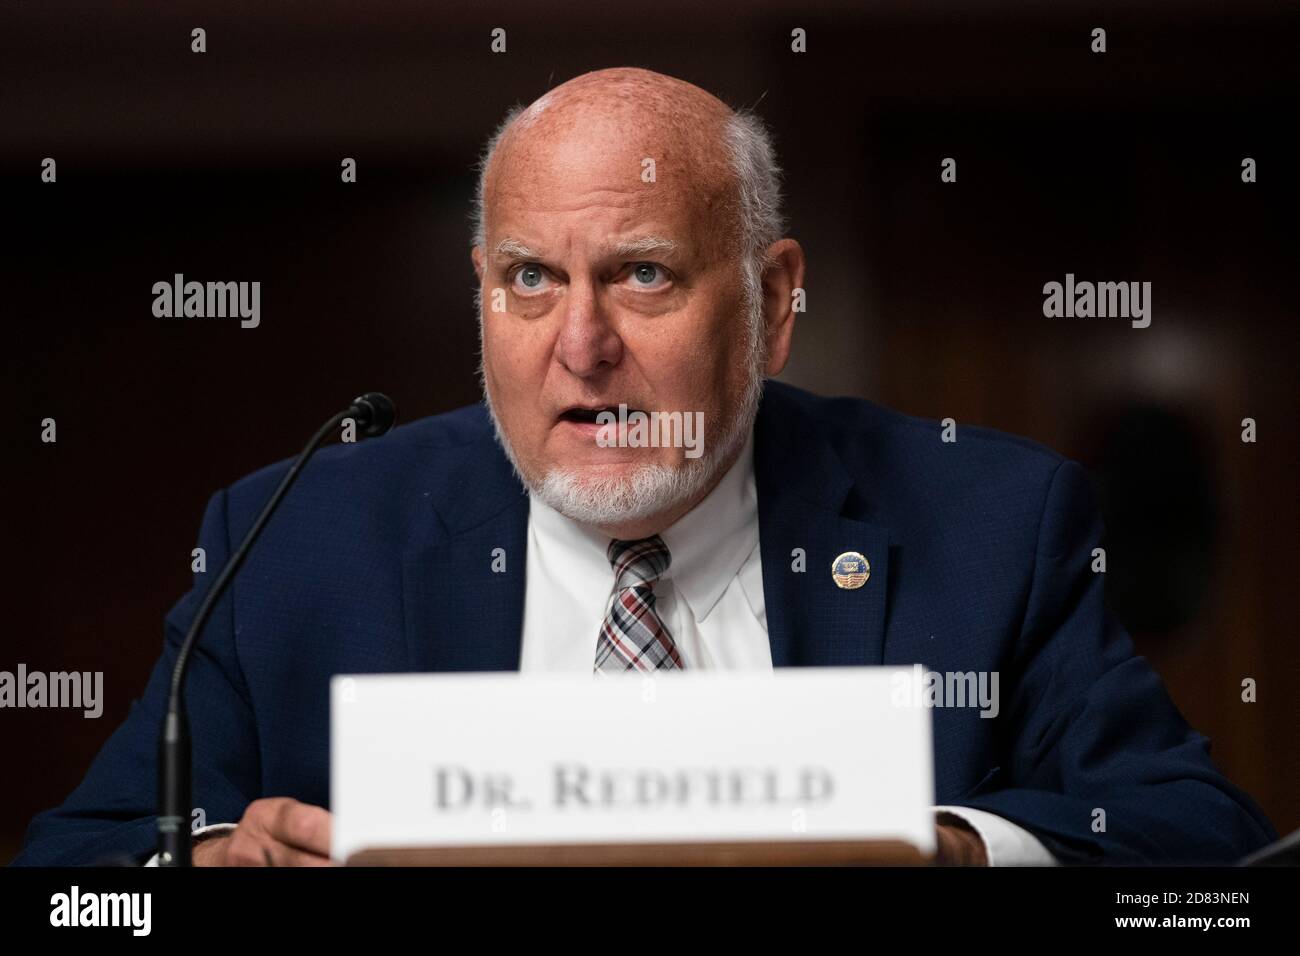 Robert Redfield, MD, Director, United States Centers for Disease Control and Prevention; testifies during a U.S. Senate Senate Health, Education, Labor, and Pensions Committee Hearing to examine COVID-19, focusing on an update on the federal response at the U.S. Capitol on September 23, 2020 in Washington, D.C. Credit: Alex Edelman/The Photo Access Stock Photo